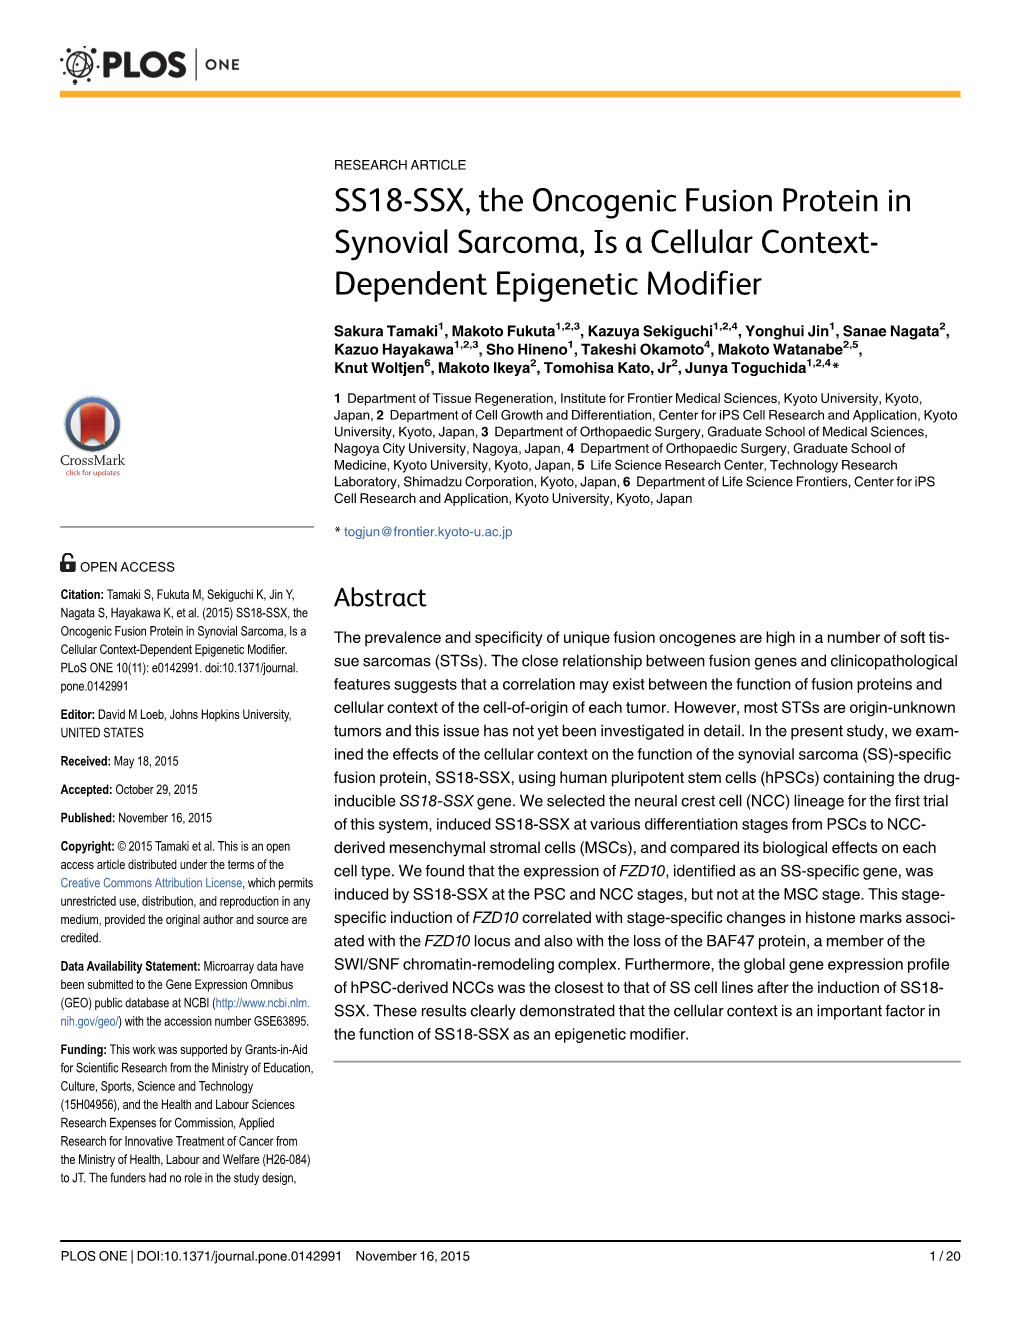 SS18-SSX, the Oncogenic Fusion Protein in Synovial Sarcoma, Is a Cellular Context- Dependent Epigenetic Modifier